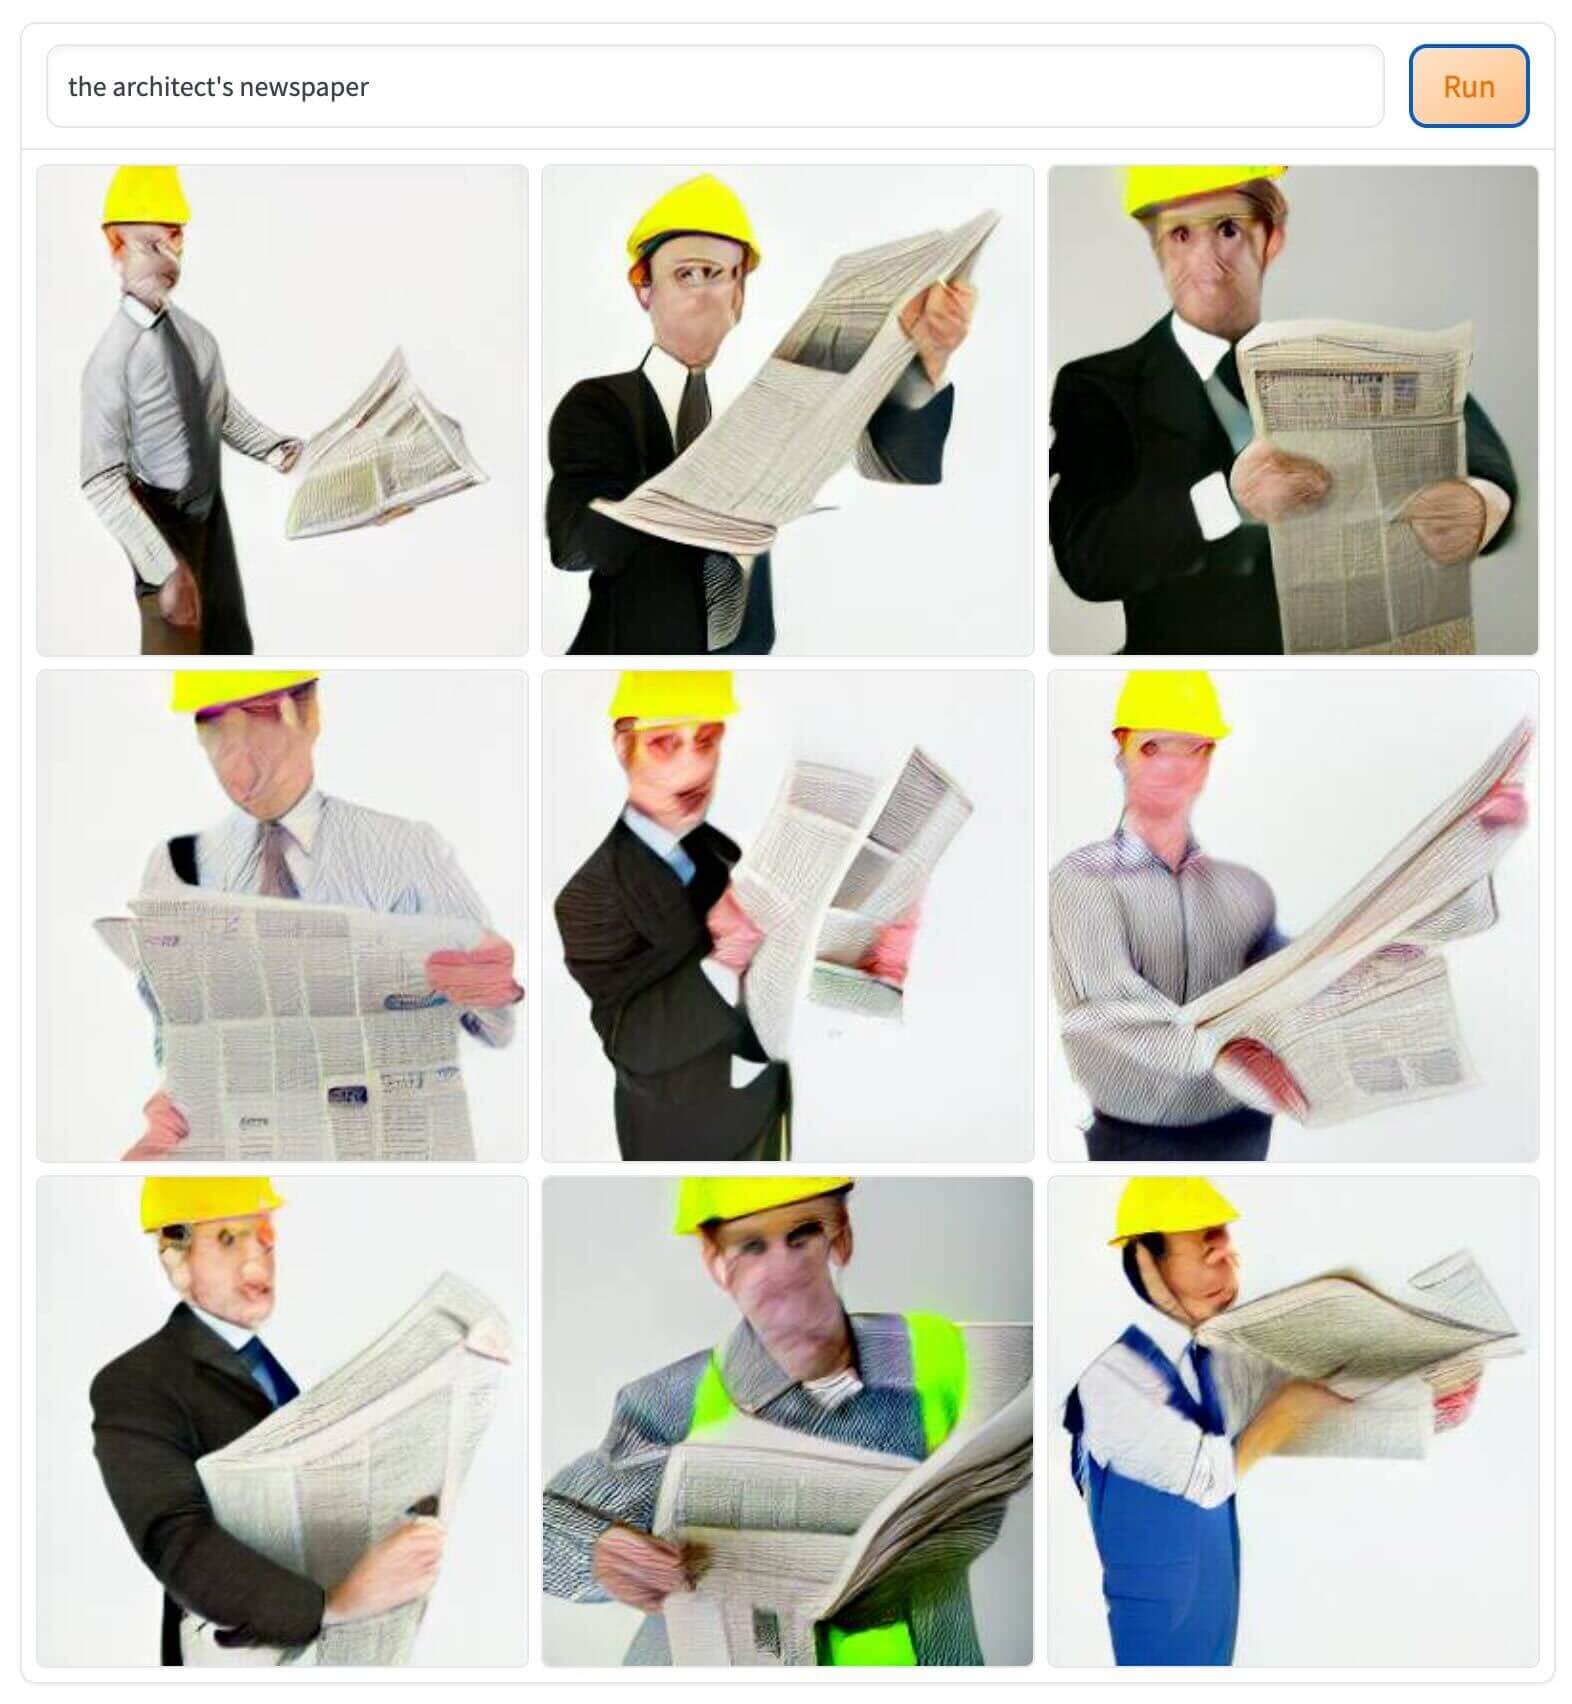 distorted man with construction helmet holding a newspaper